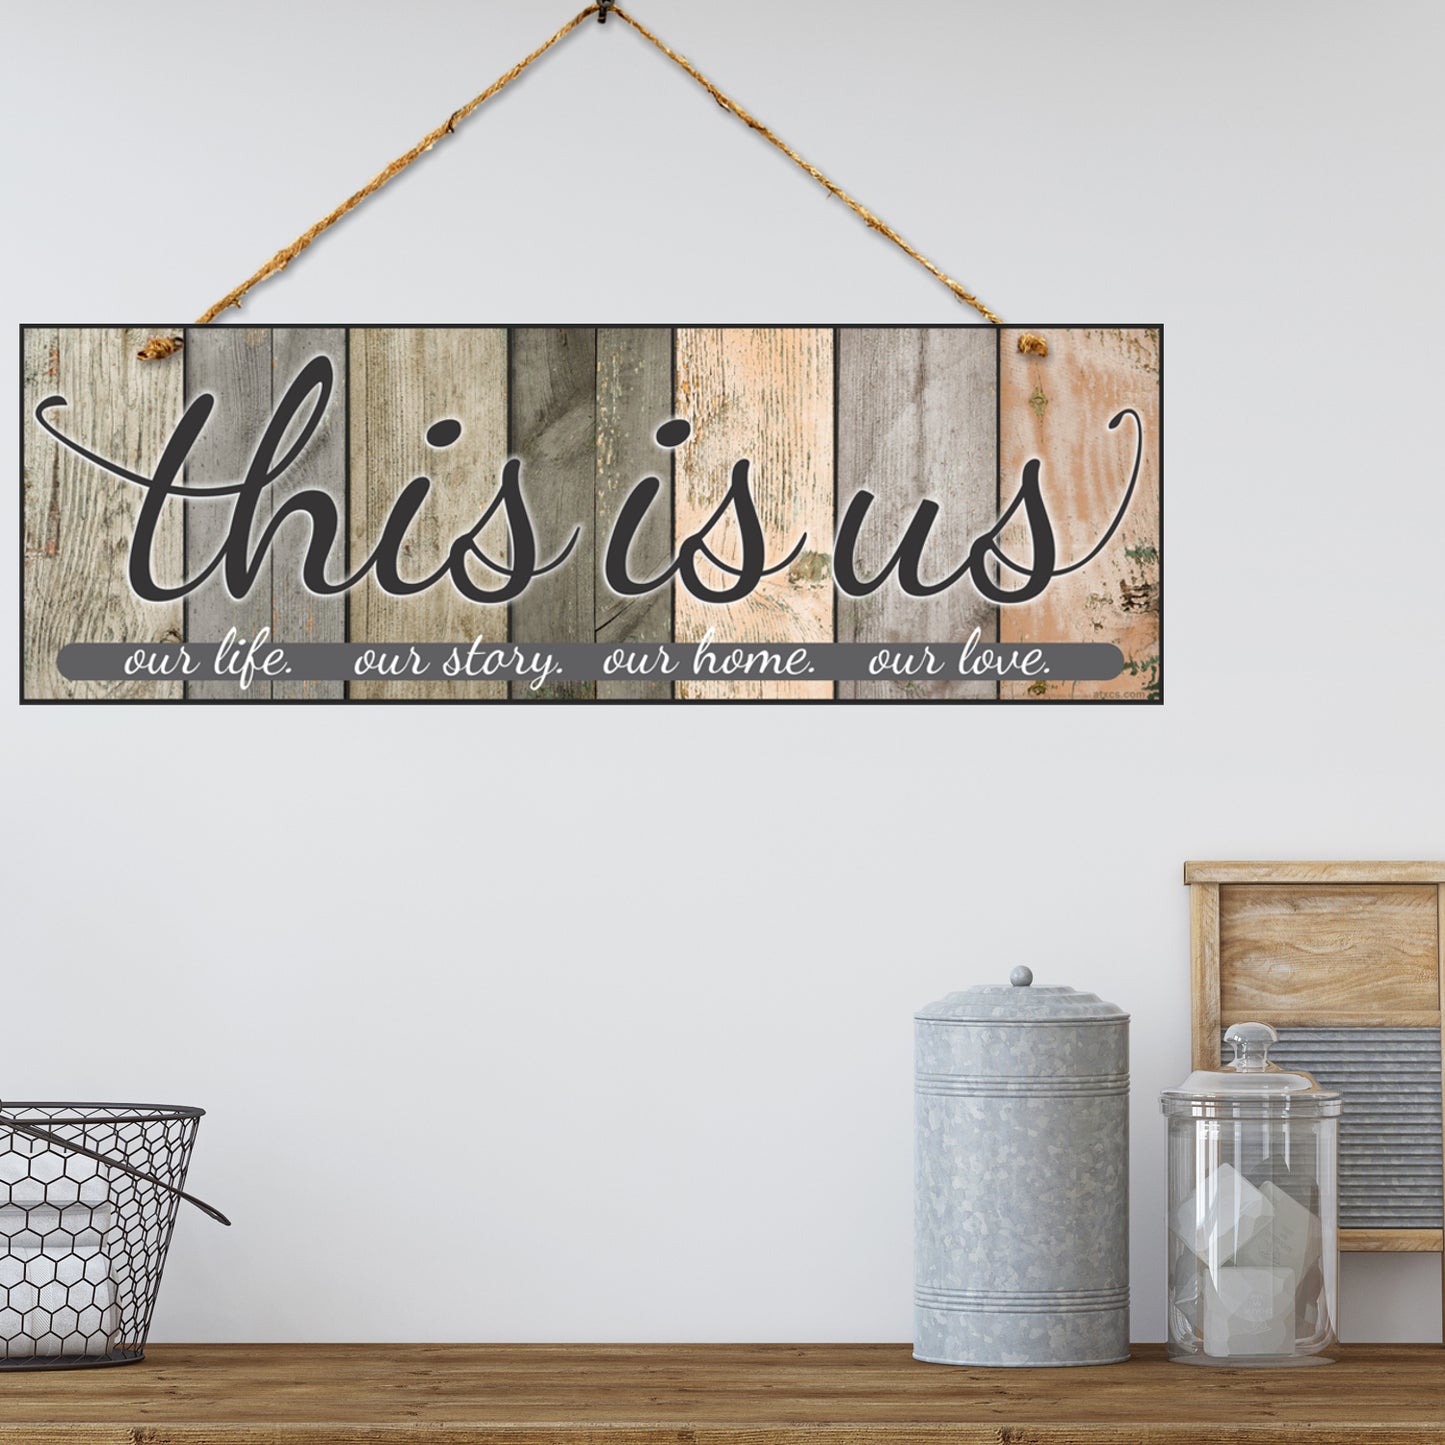 Double Sided Home Decor Sign - This is us. our life. our story. our home. our love. Colors and Light and Dark Grays - Size 6 x 17.25